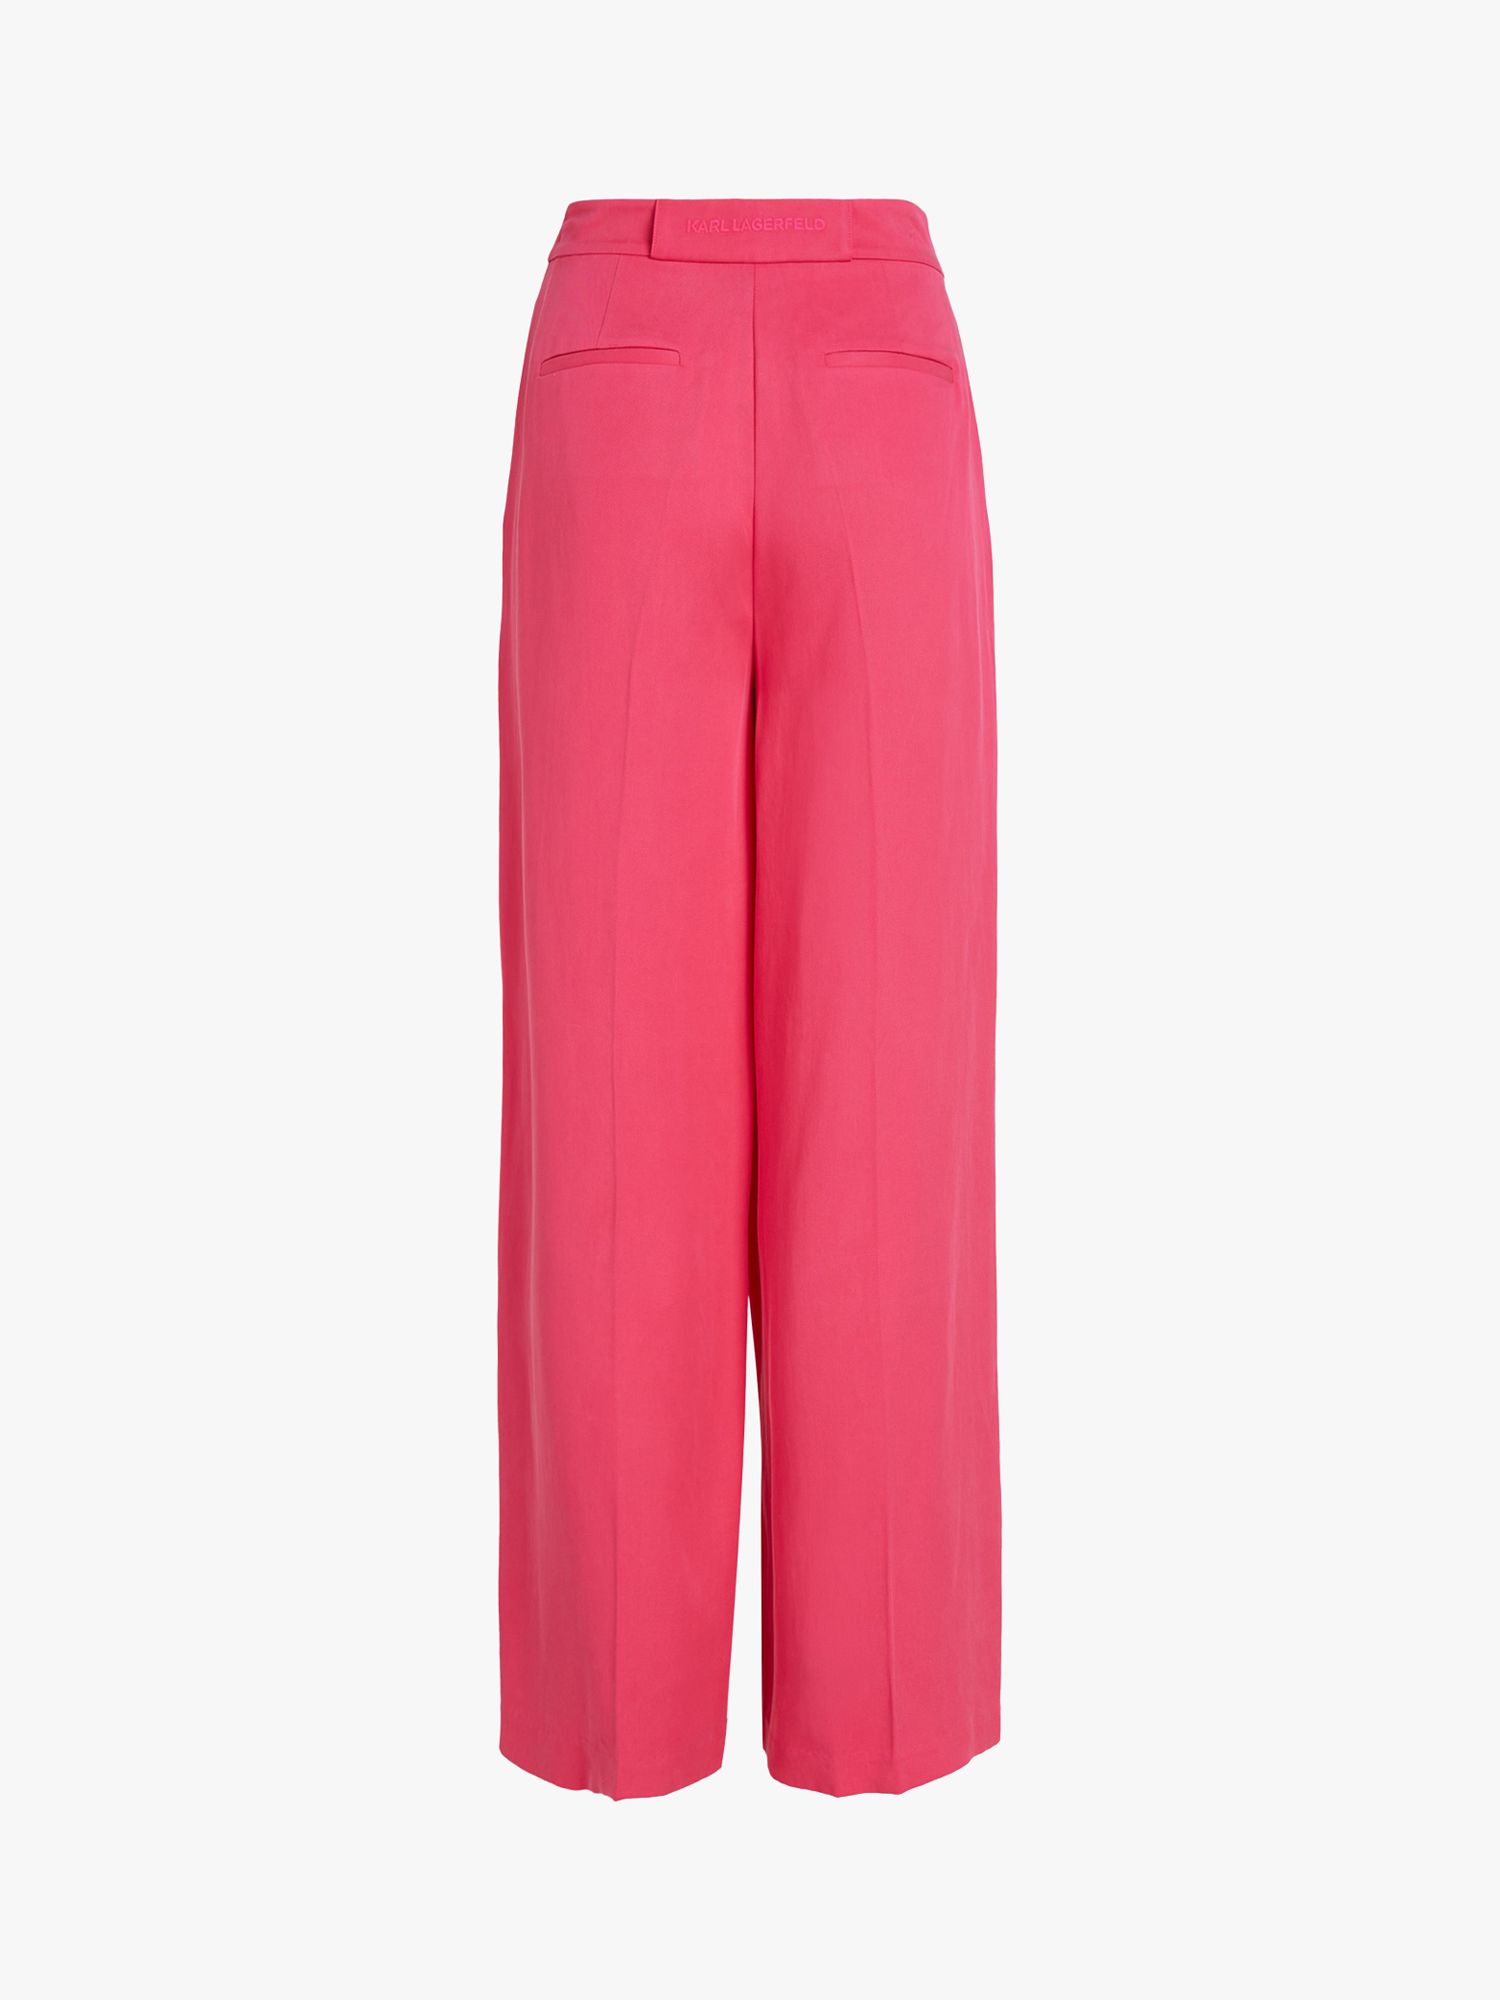 KARL LAGERFELD Wide Leg Day Trousers, Cabaret Pink at John Lewis & Partners